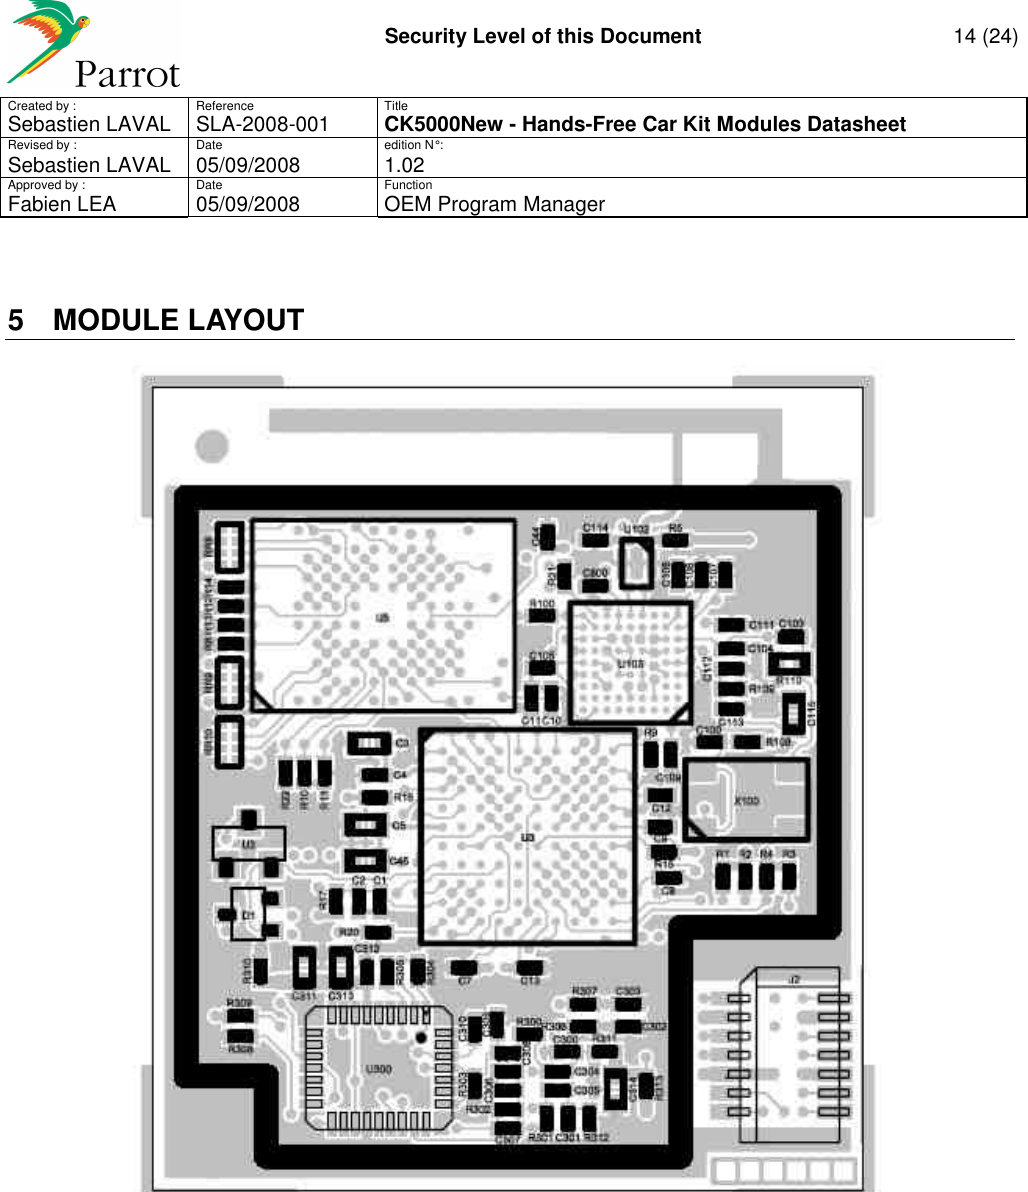     Security Level of this Document  14 (24) Created by :  Reference  Title Sebastien LAVAL   SLA-2008-001 CK5000New - Hands-Free Car Kit Modules Datasheet Revised by :  Date  edition N° : Sebastien LAVAL  05/09/2008  1.02 Approved by :  Date  Function     Fabien LEA  05/09/2008  OEM Program Manager   5  MODULE LAYOUT    